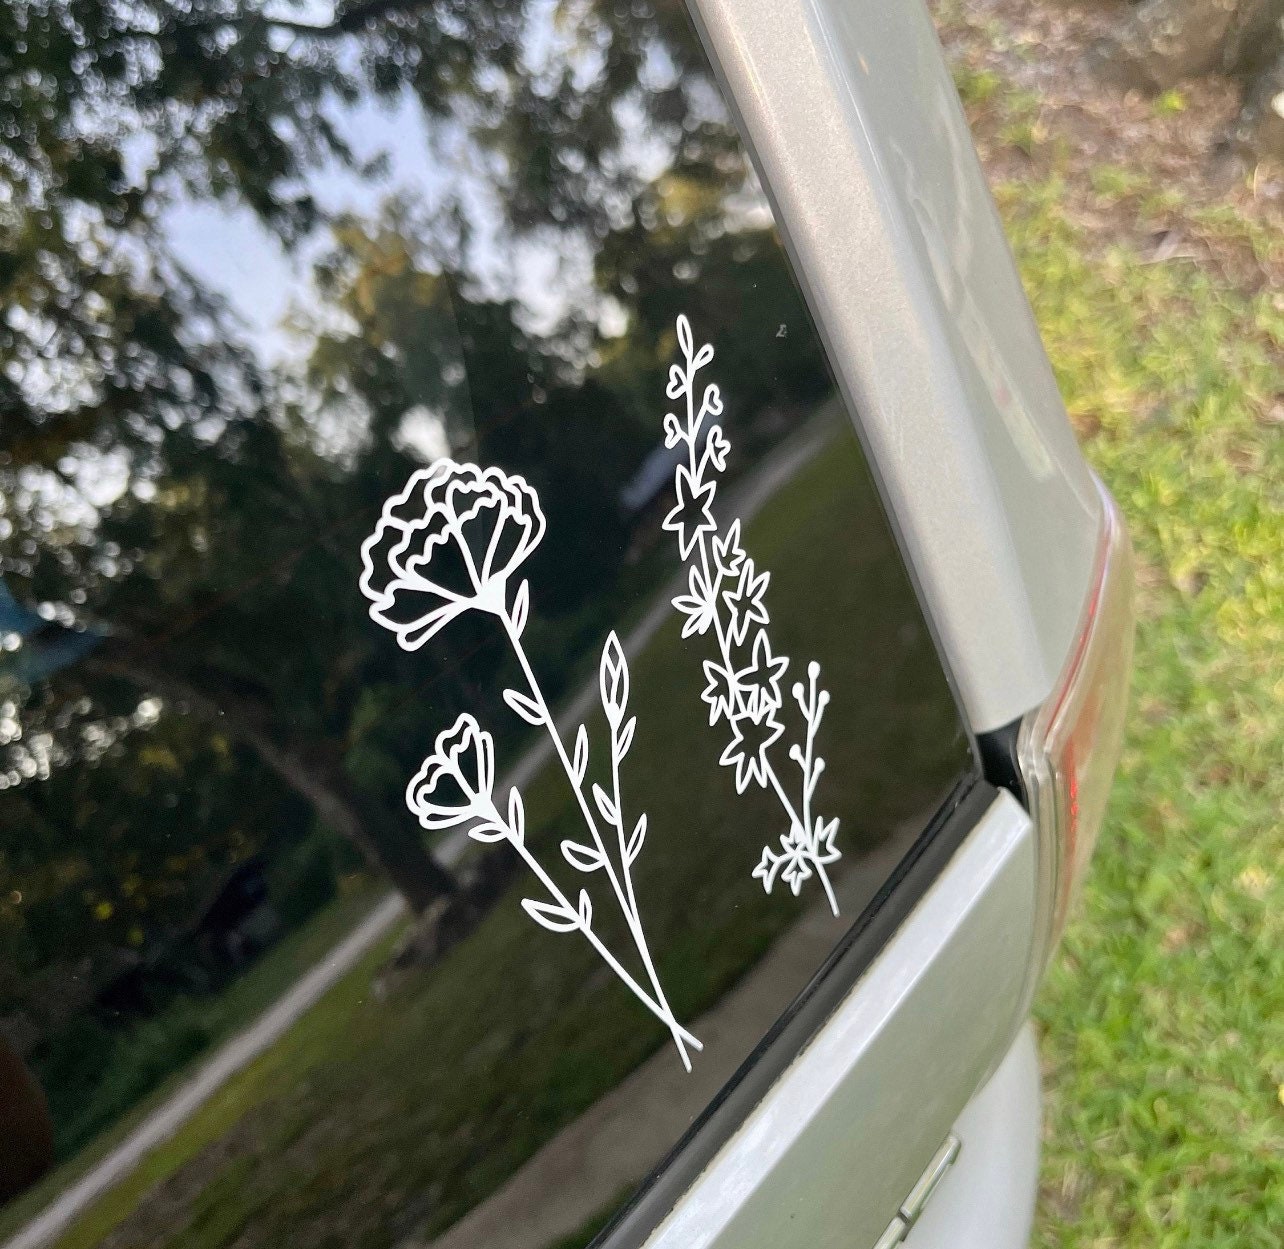  Wildflowers Car Decal, Wildflower Boho Car Decal, Plant Lover  Gift Idea, Botanical Leaf Sticker, Bumper Stickers, Car Sticker, Decor  Sticker, Waterproof, Car Window Decals, (7 wide, White) : Handmade Products